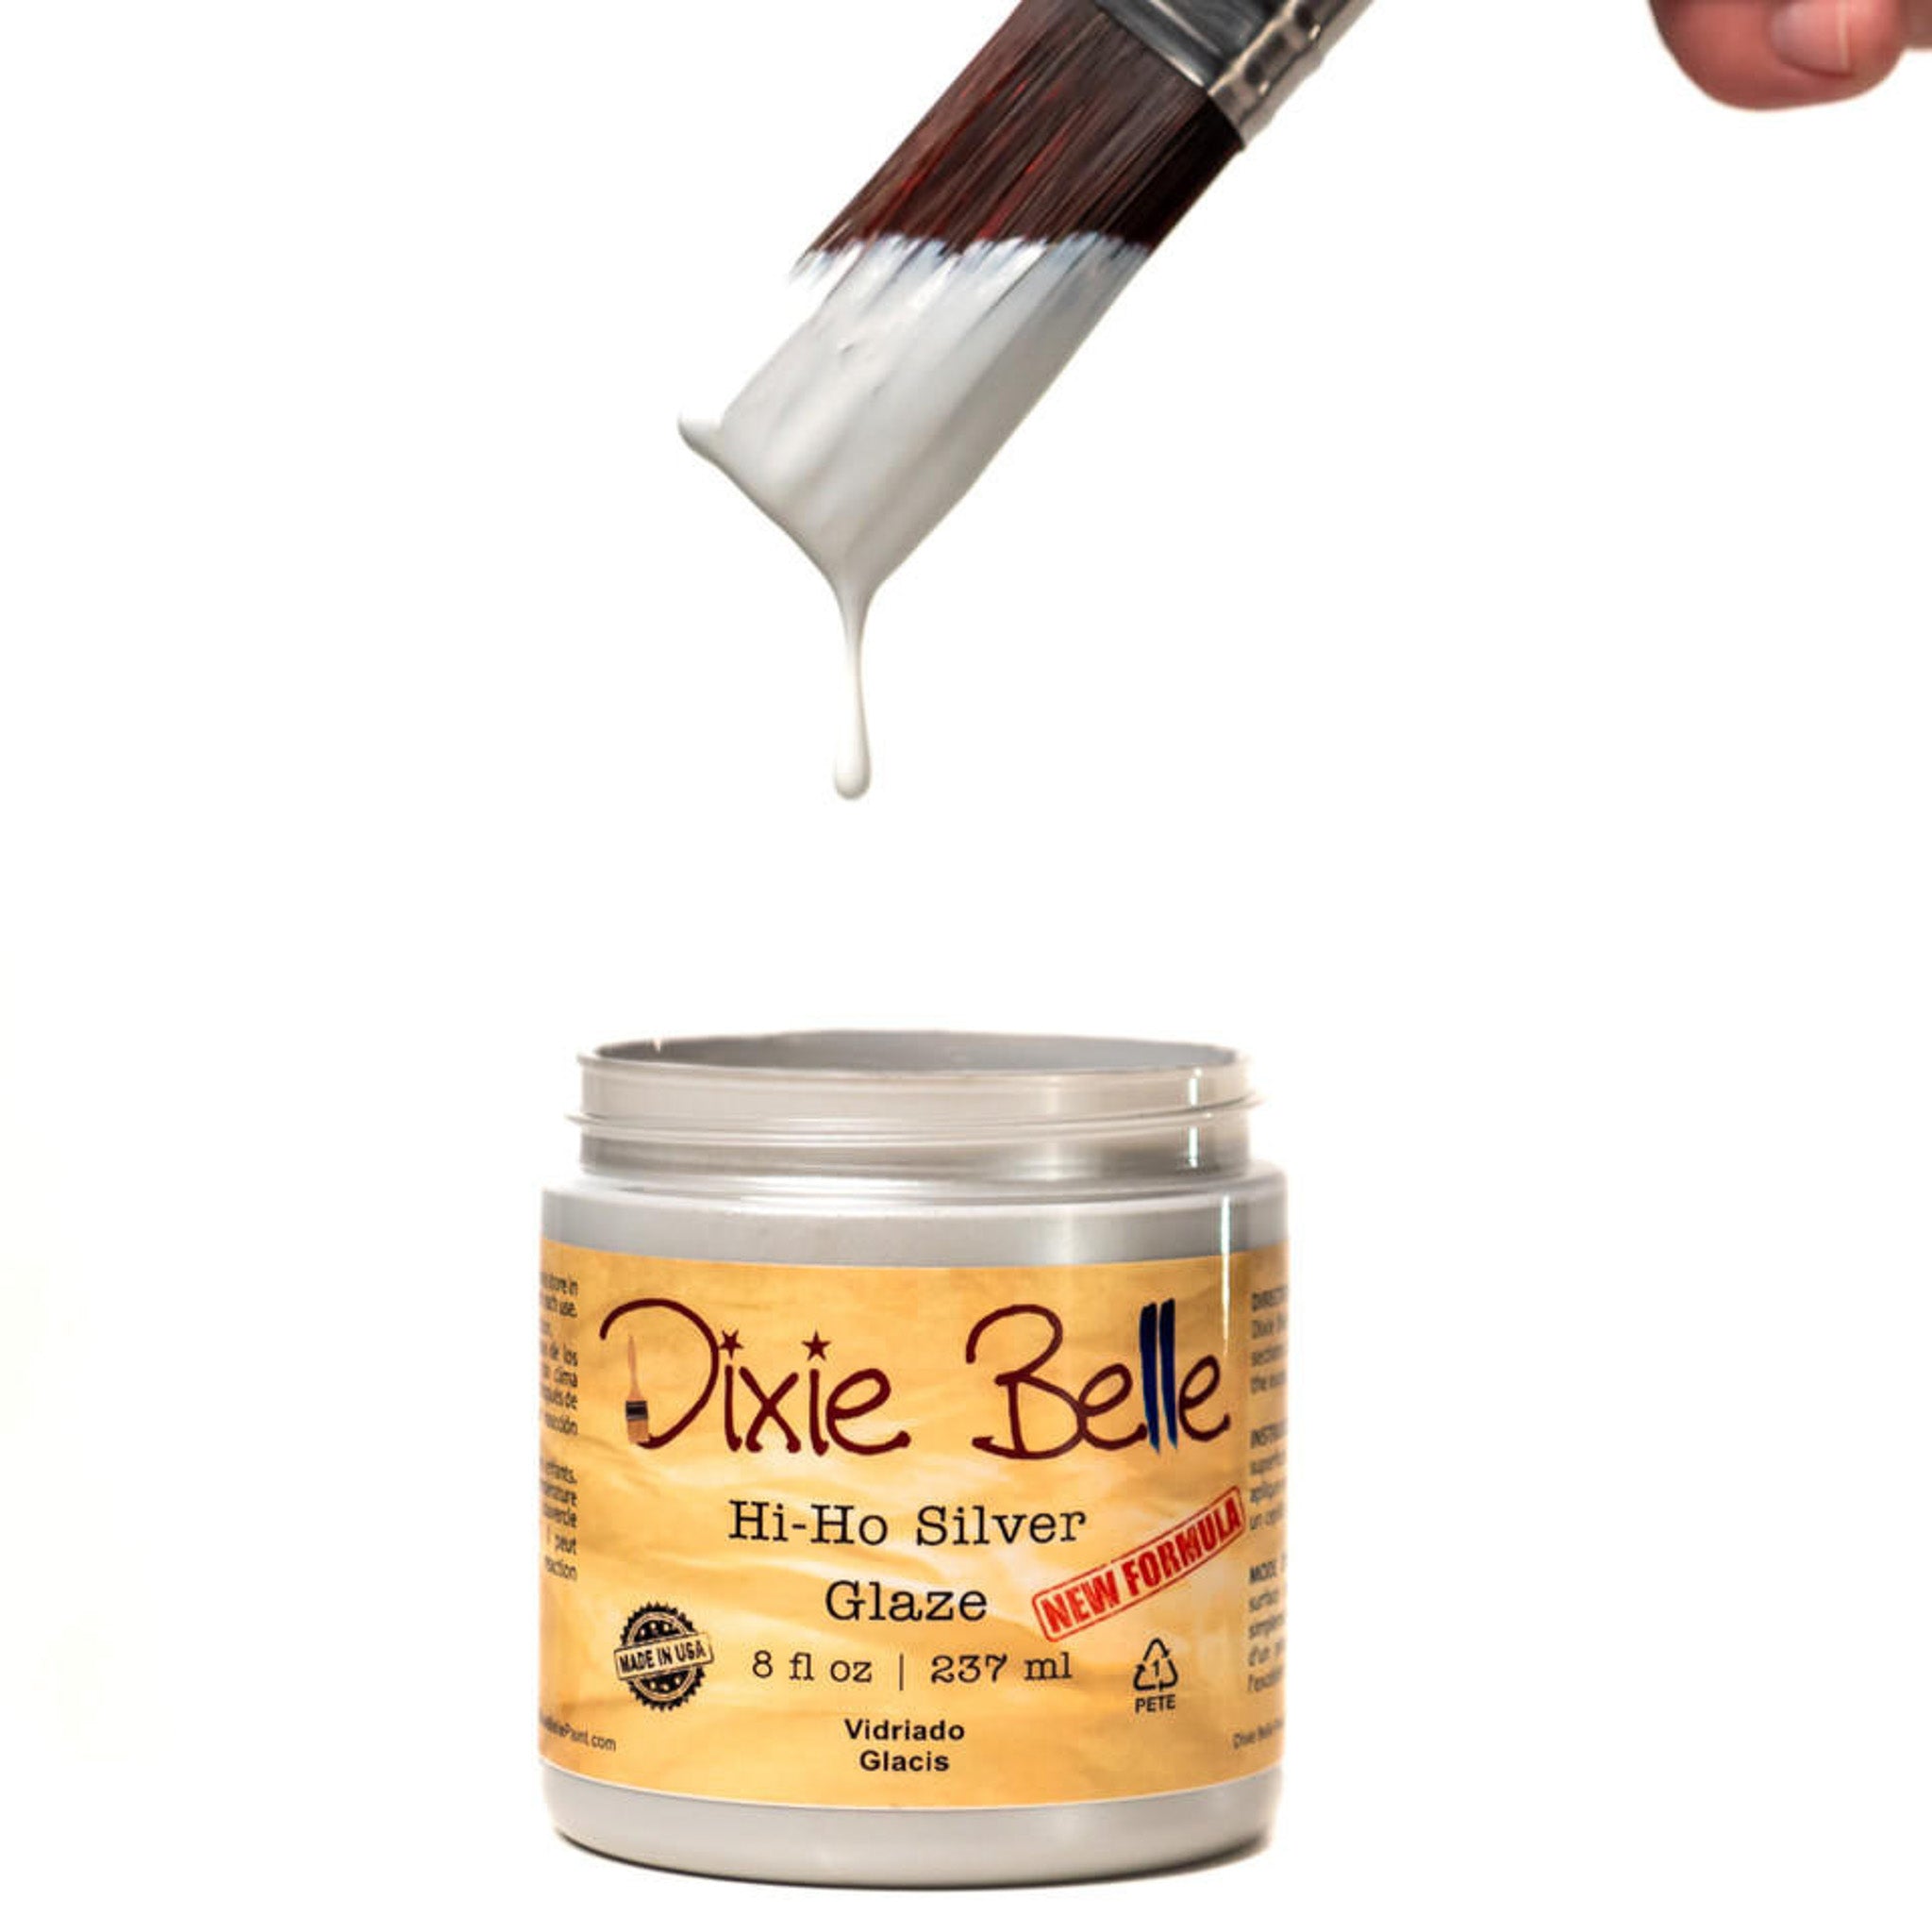 An open container of an 8oz/237ml Dixie Belle Hi Ho Silver Glaze with a dripping paintbrush above it is against a white background.